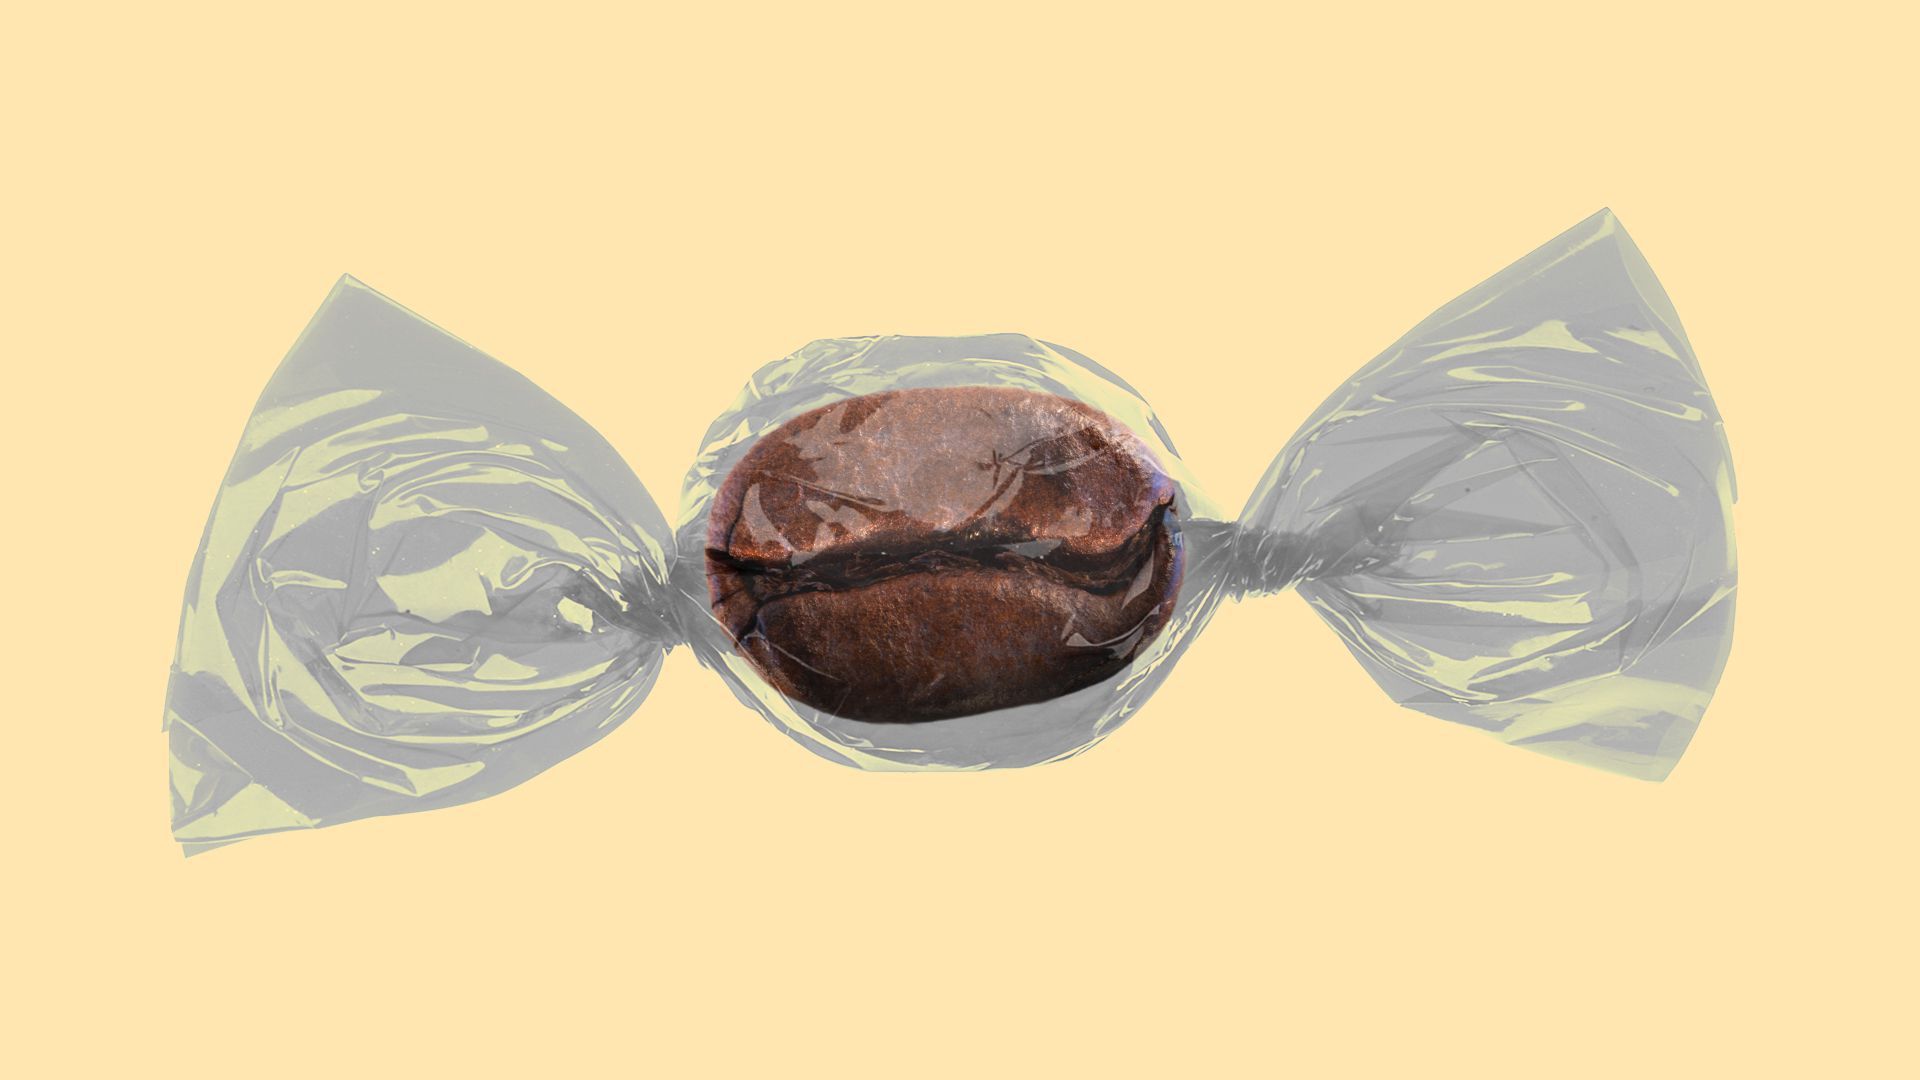 An illustration of a coffee bean in a candy wrapper